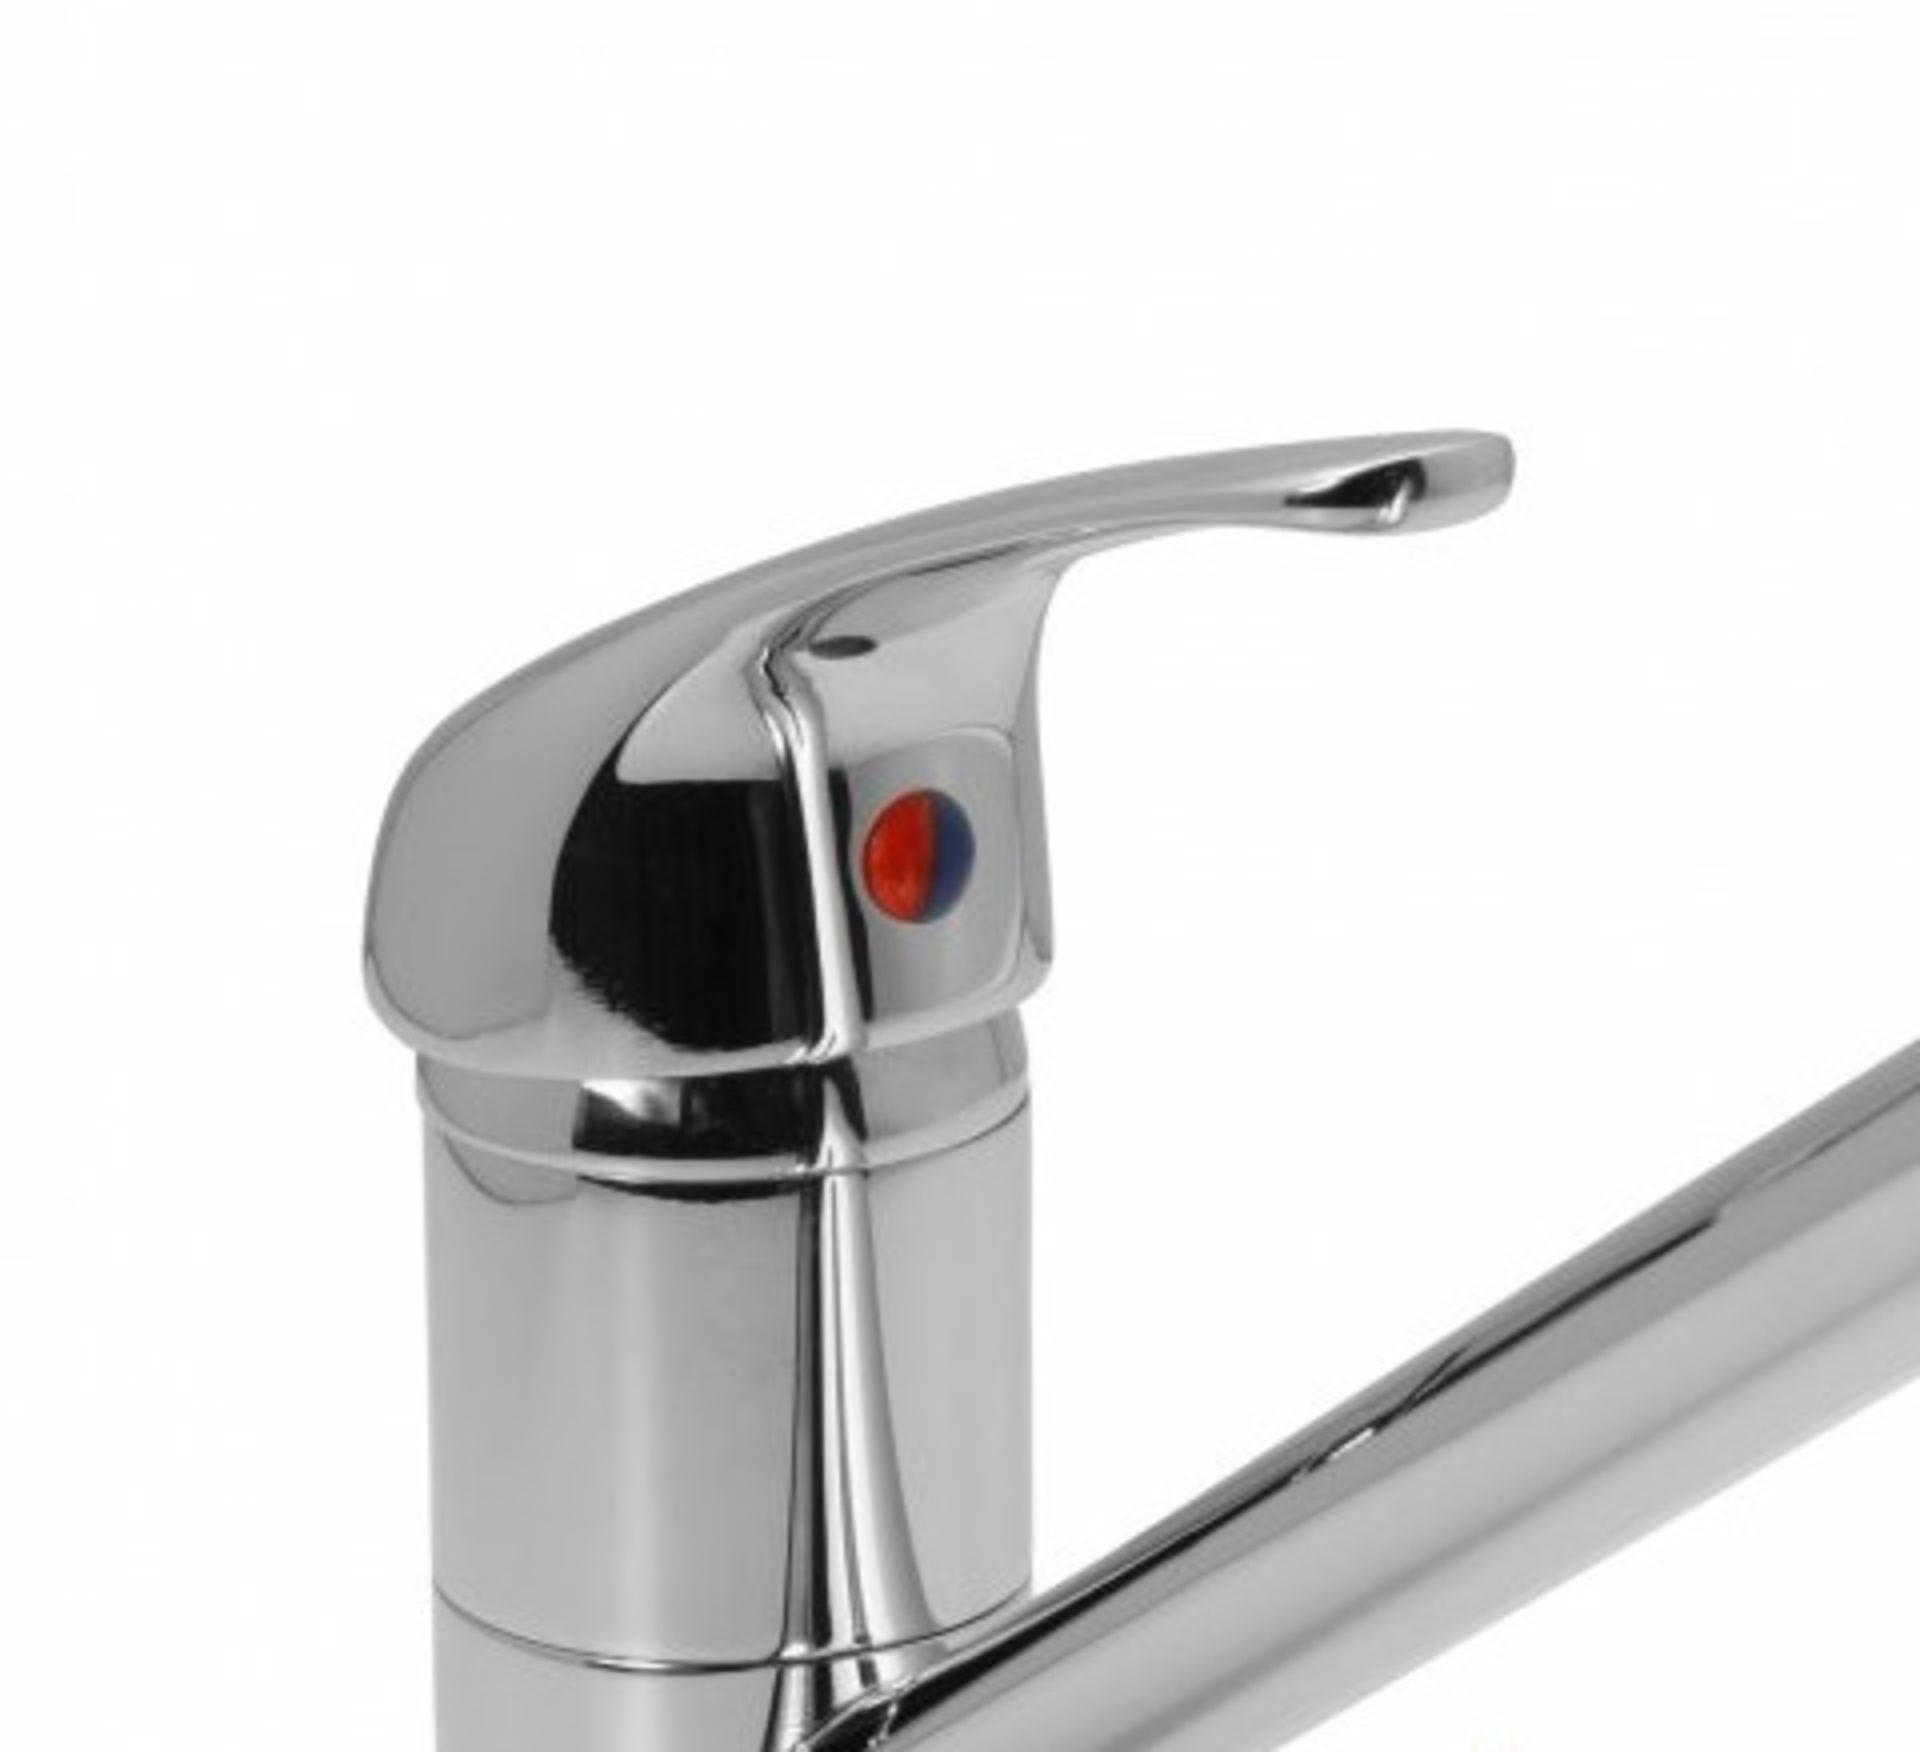 AA102- Tessa Chrome Plated Kitchen Mixer Tap - Swivel Spout The lengthy, bold design of the Tessa - Image 3 of 3